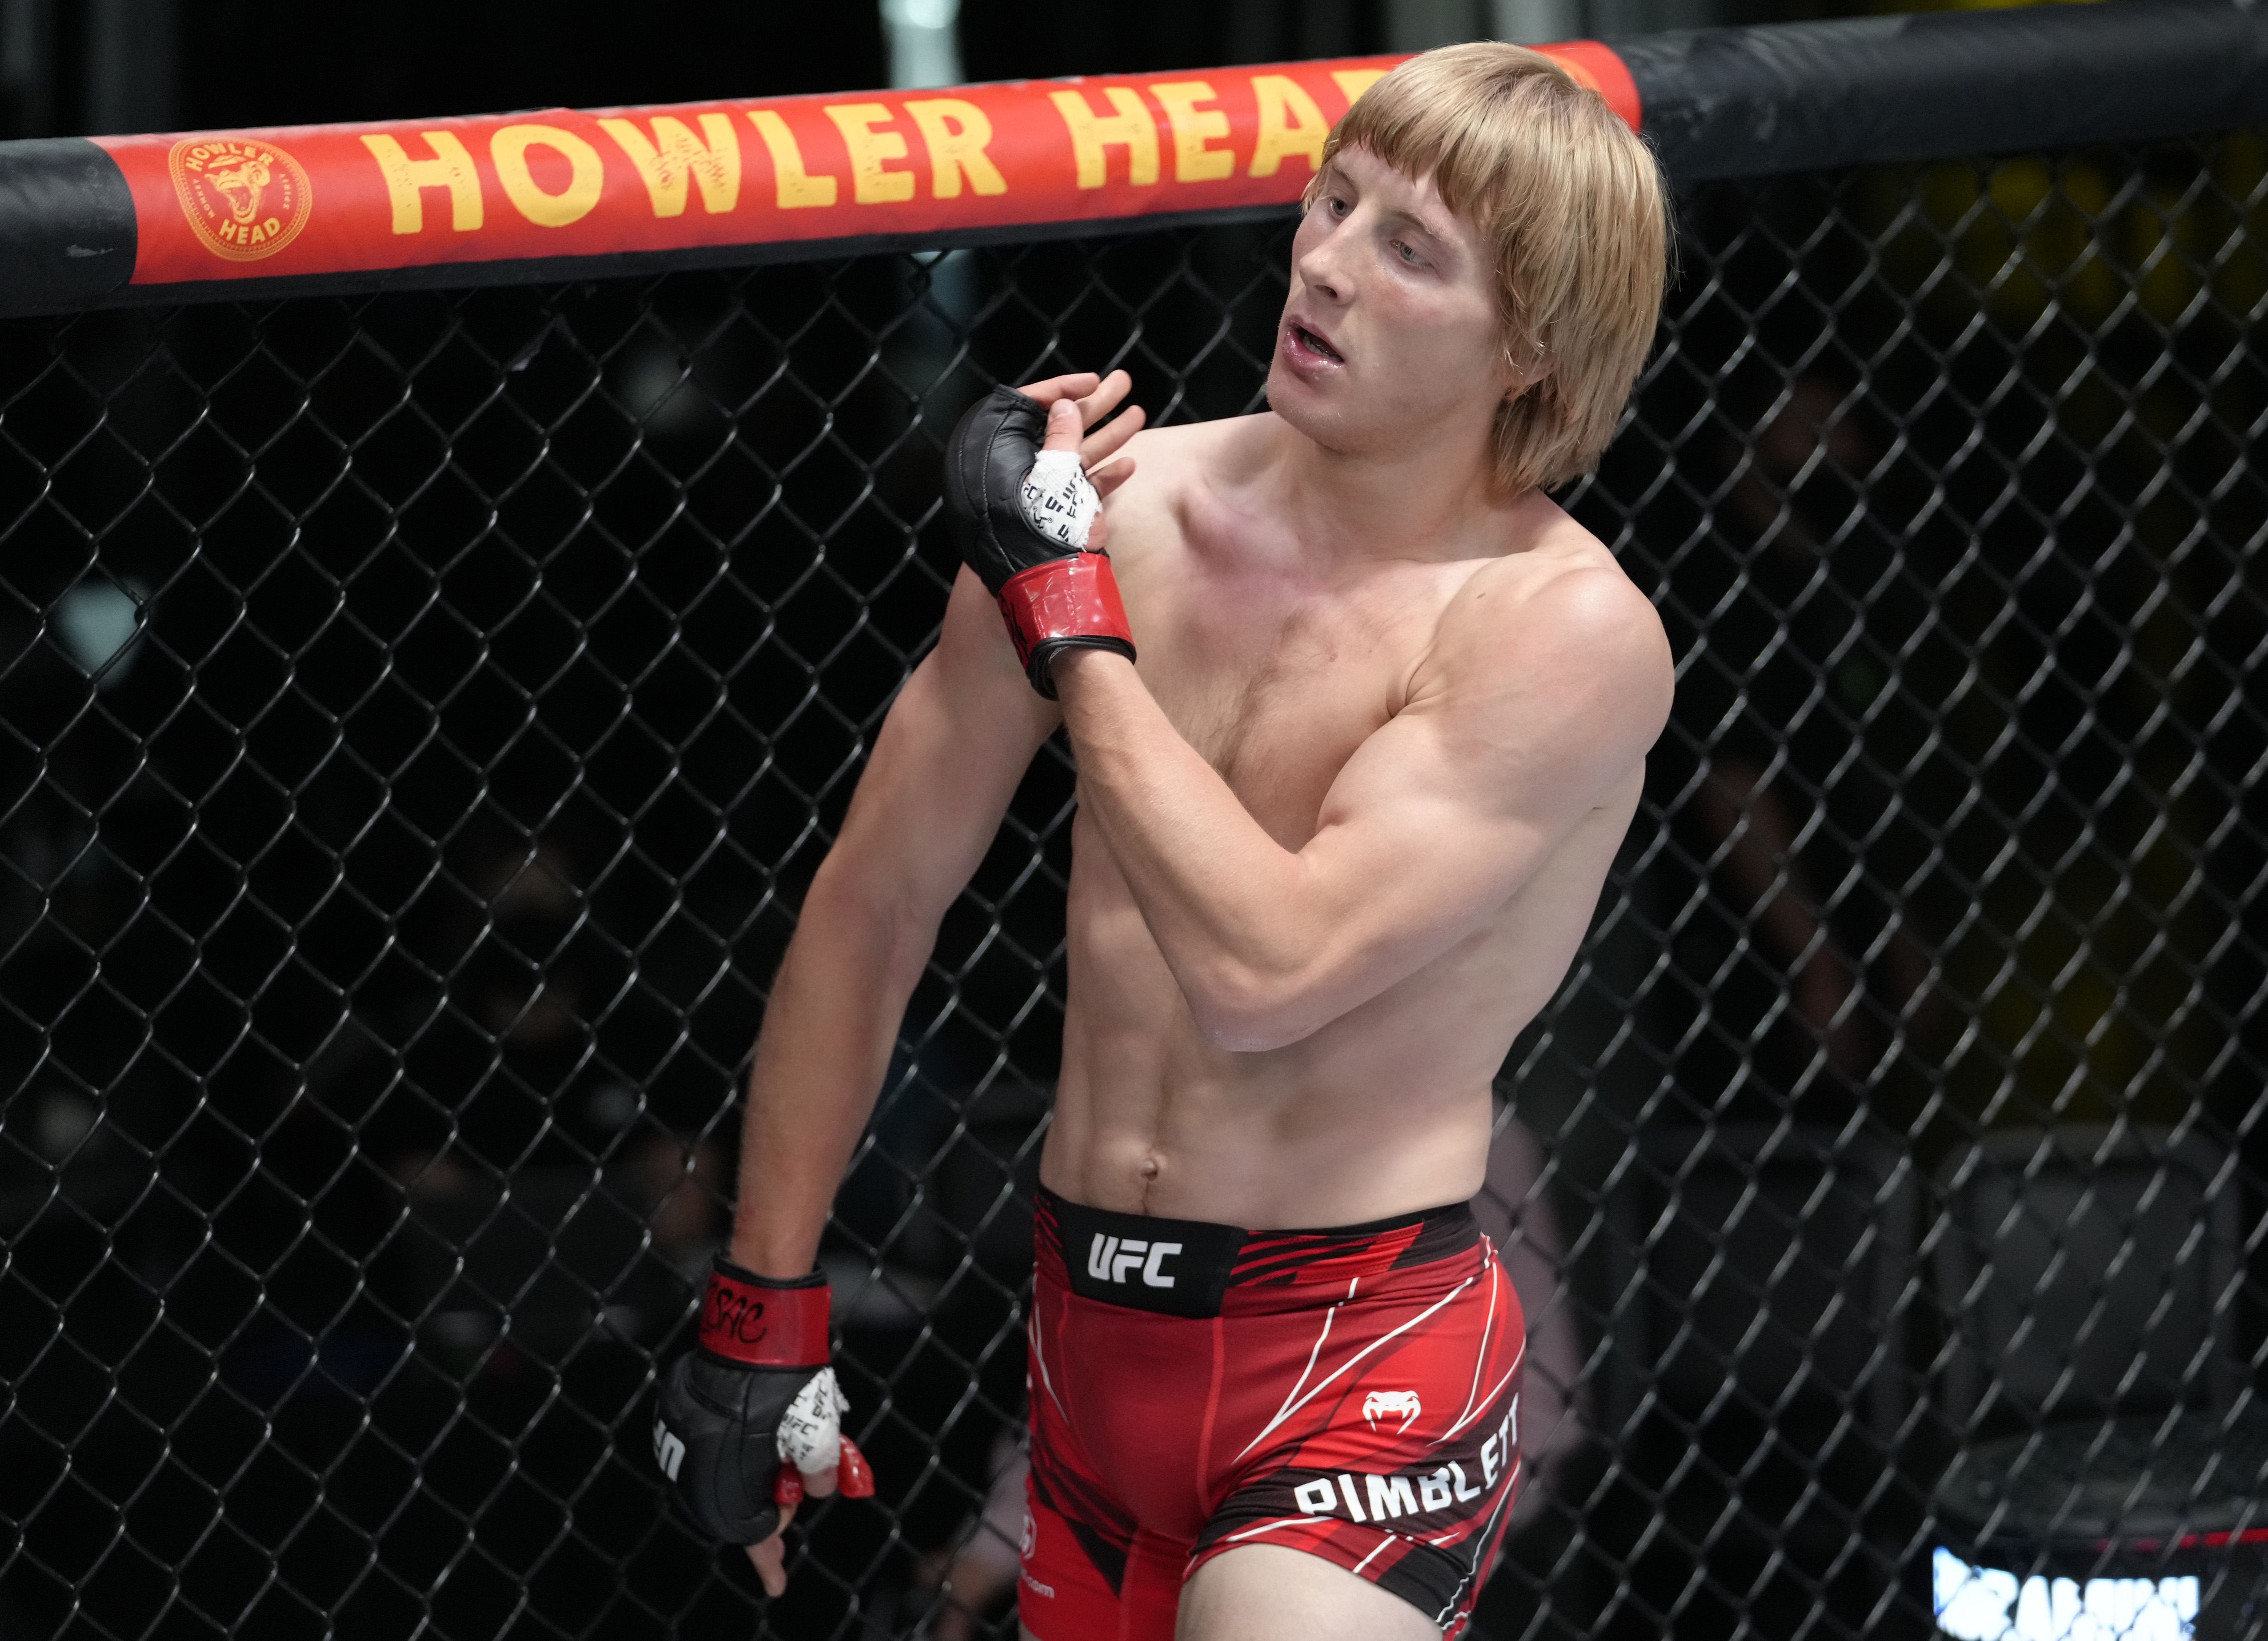 Paddy Pimblett celebrates after his UFC debut victory in September.